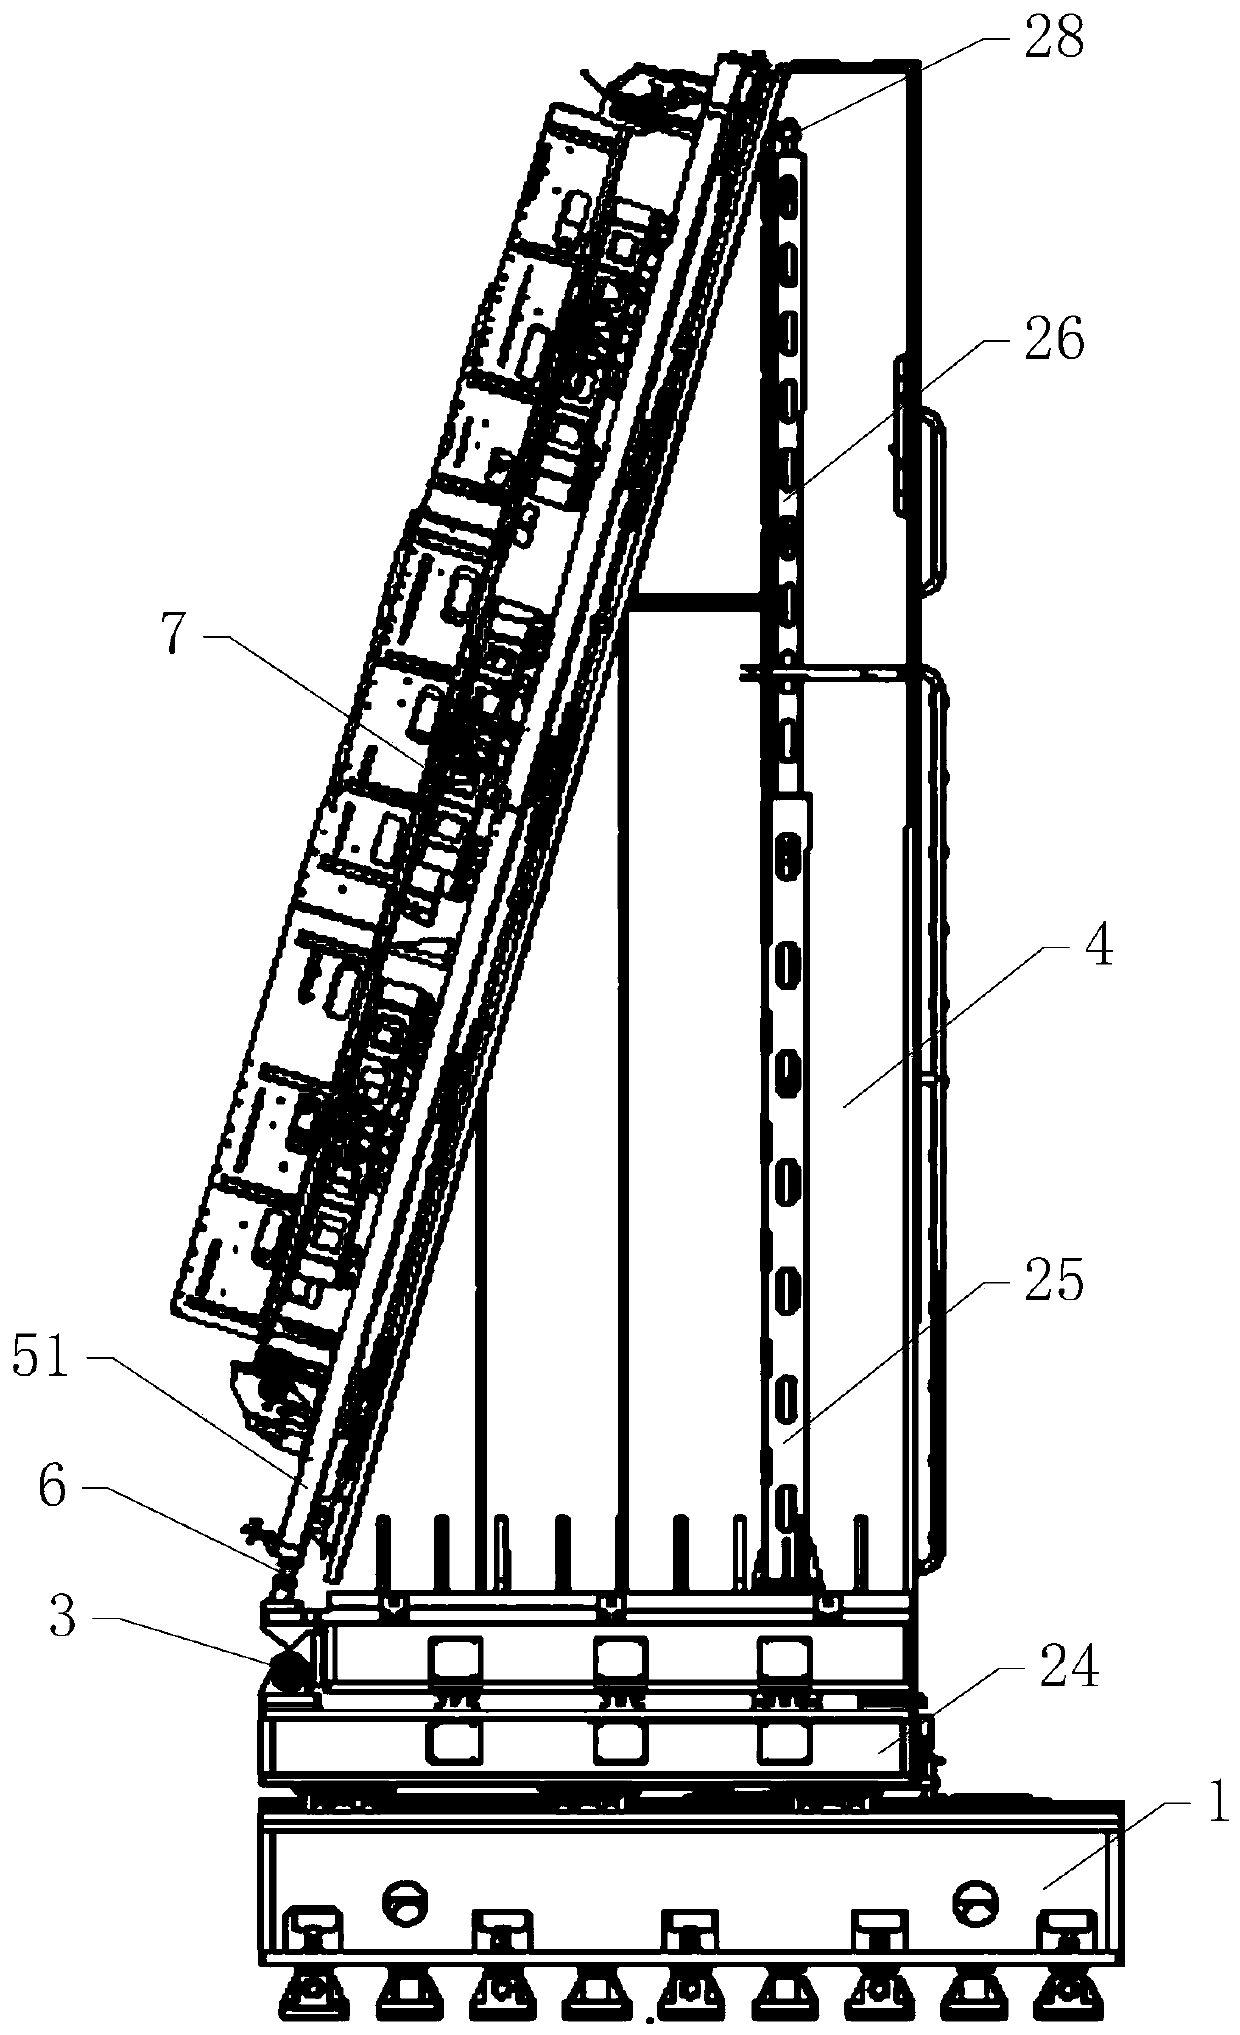 A Mechanical Attitude Adjustment System for Wing Root Rib Positioning Tooling